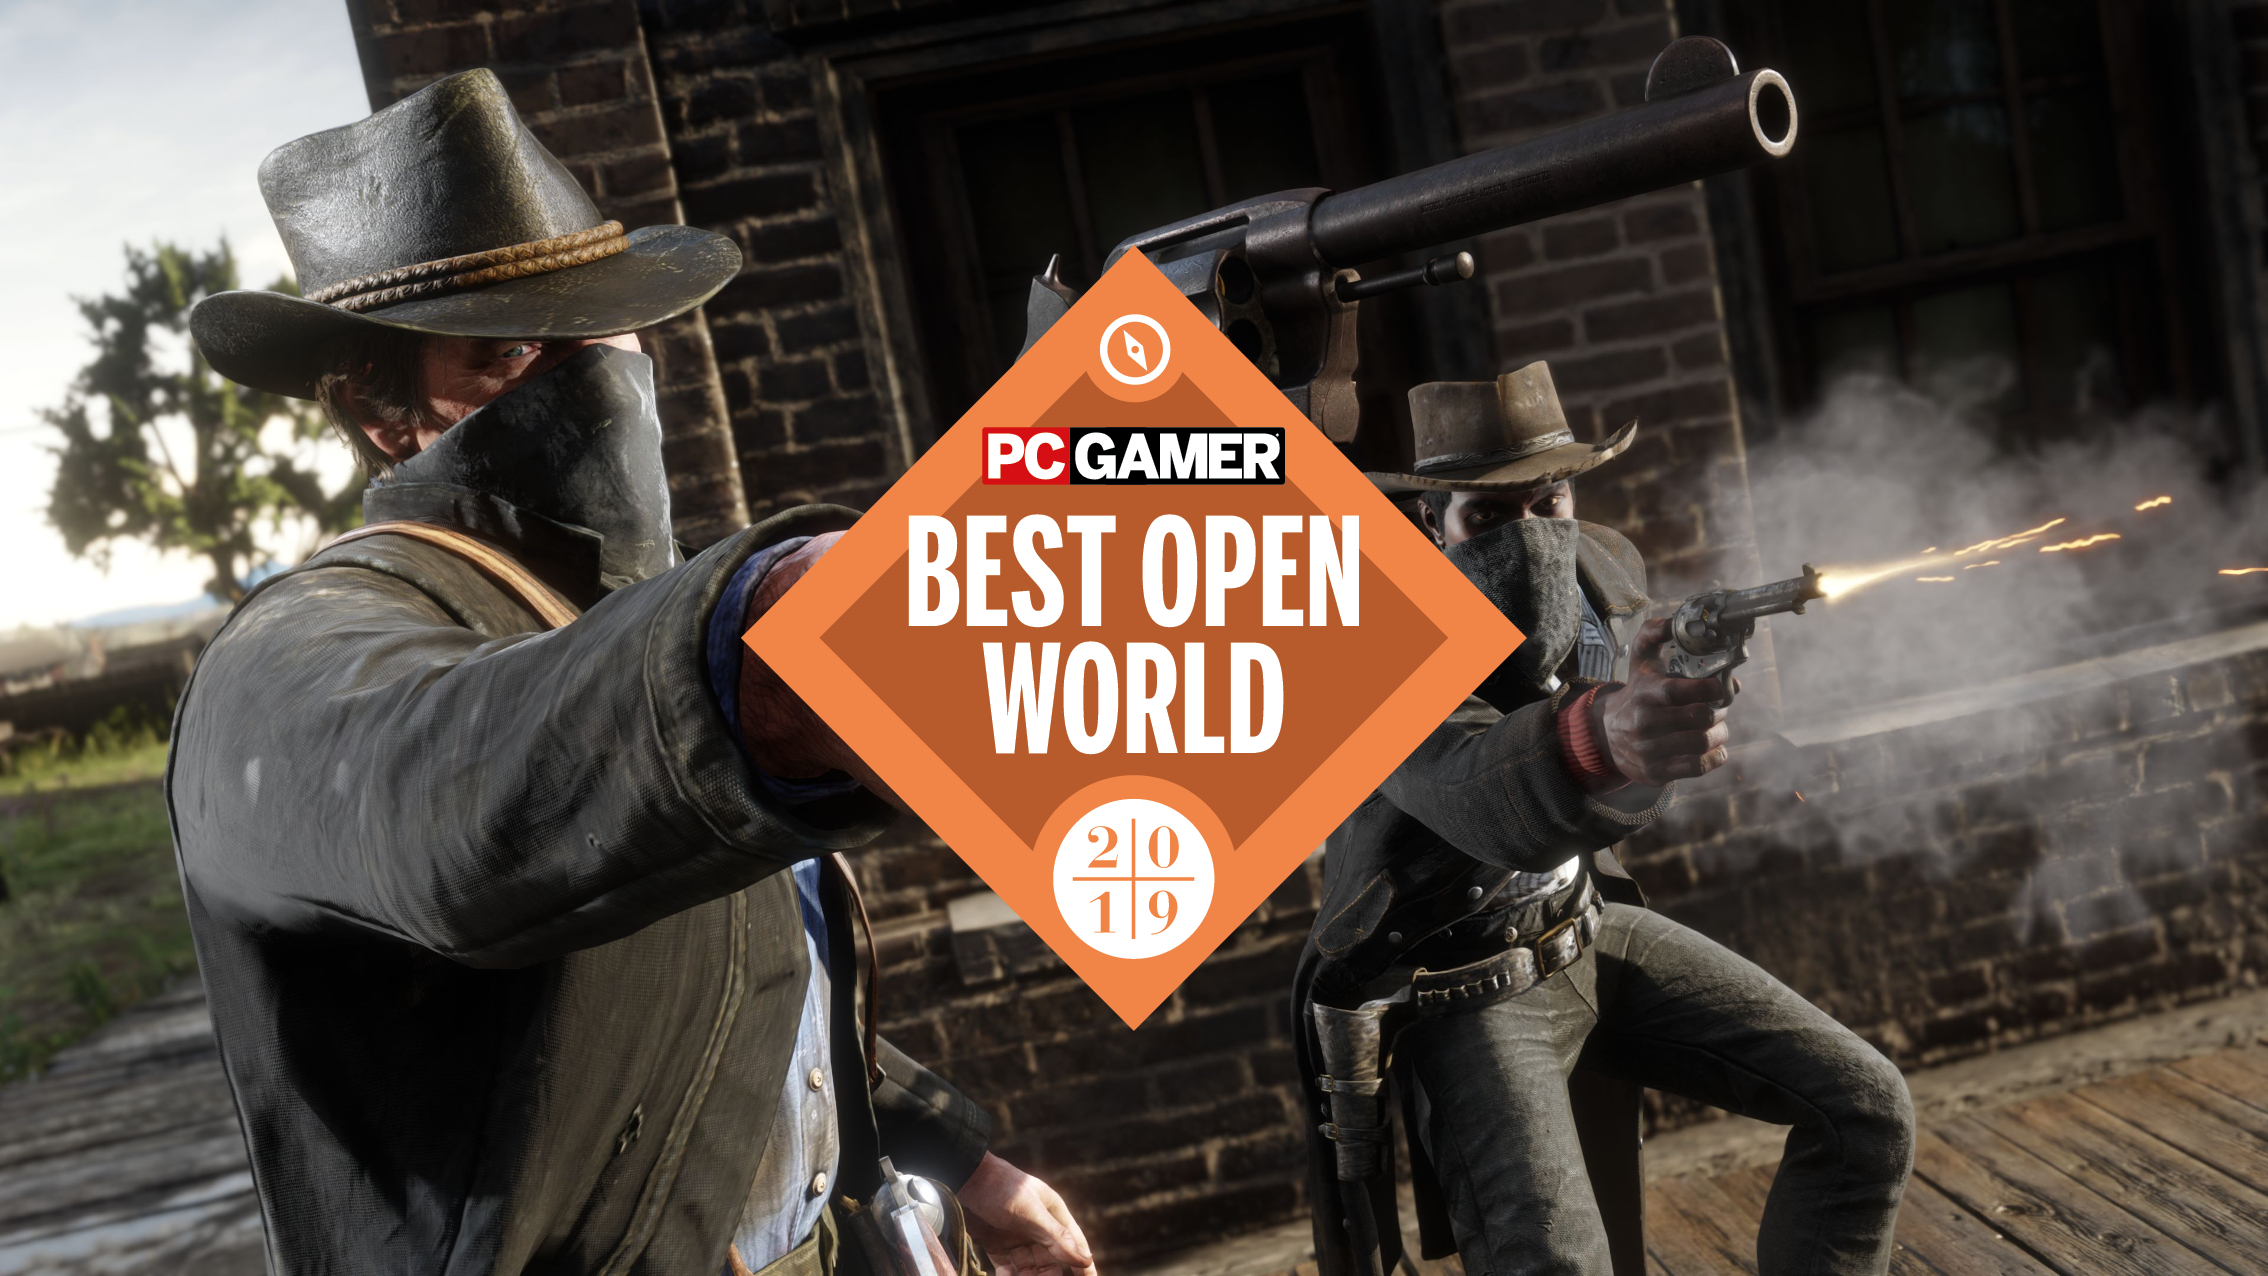 RED DEAD ONLINE PC GAMERS